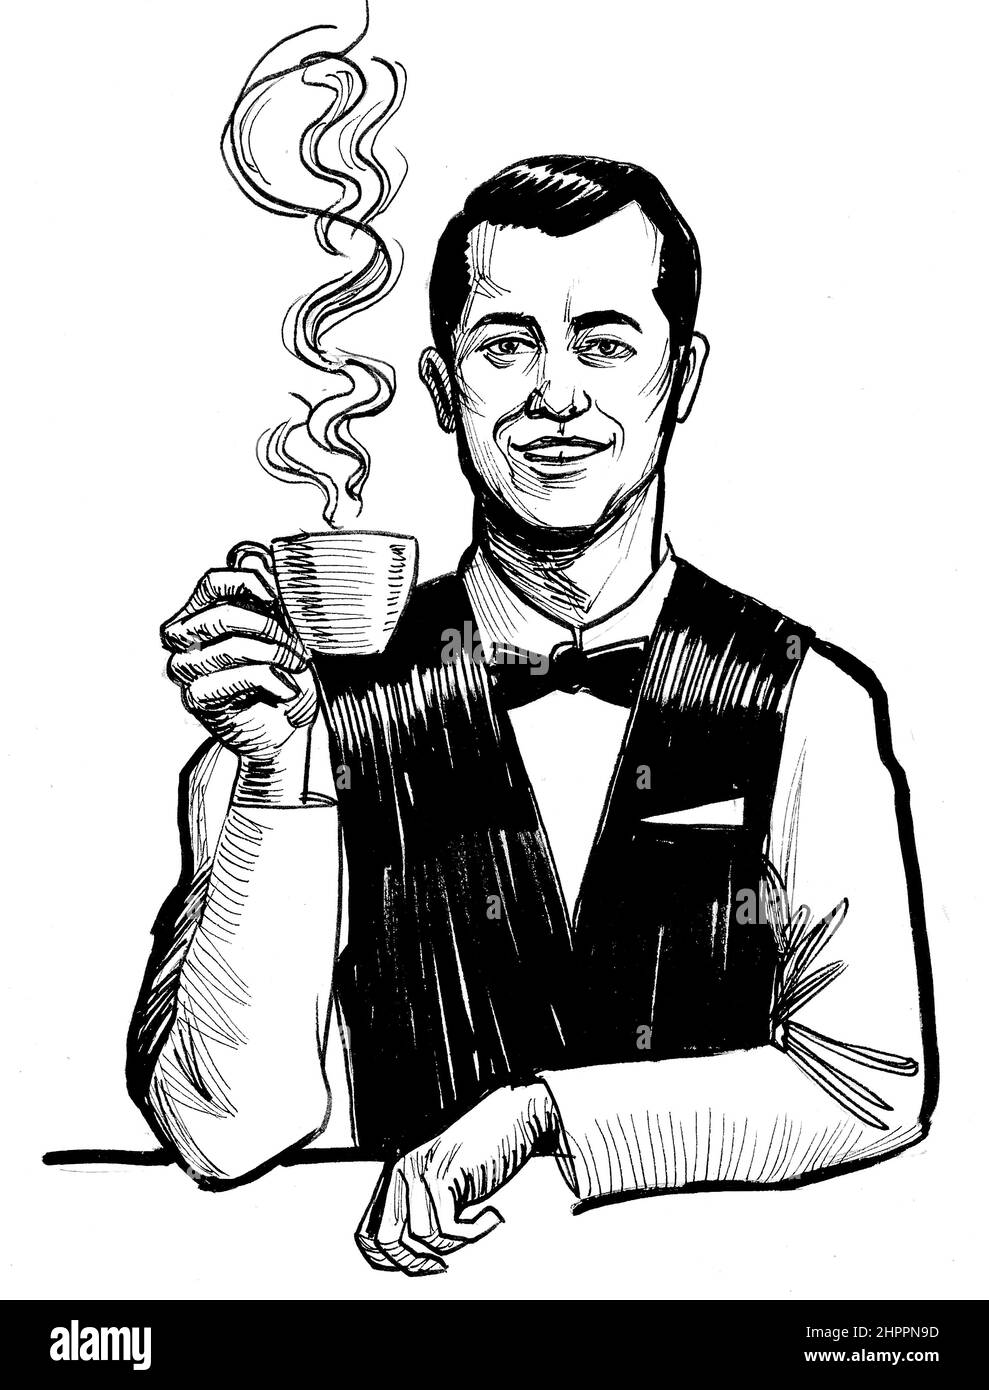 Barista with a cup of coffee. Ink black and white drawing Stock Photo